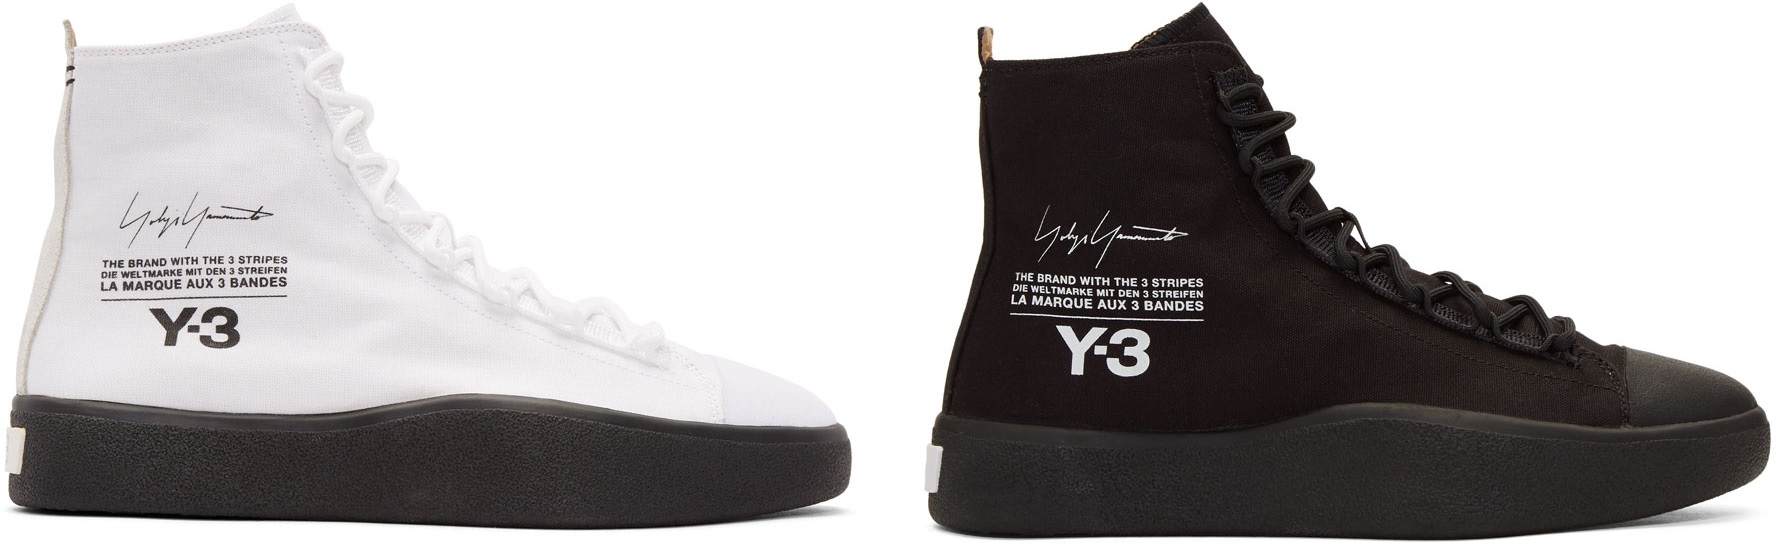 Here are Y-3’s White Bashyo High-Top Sneakers